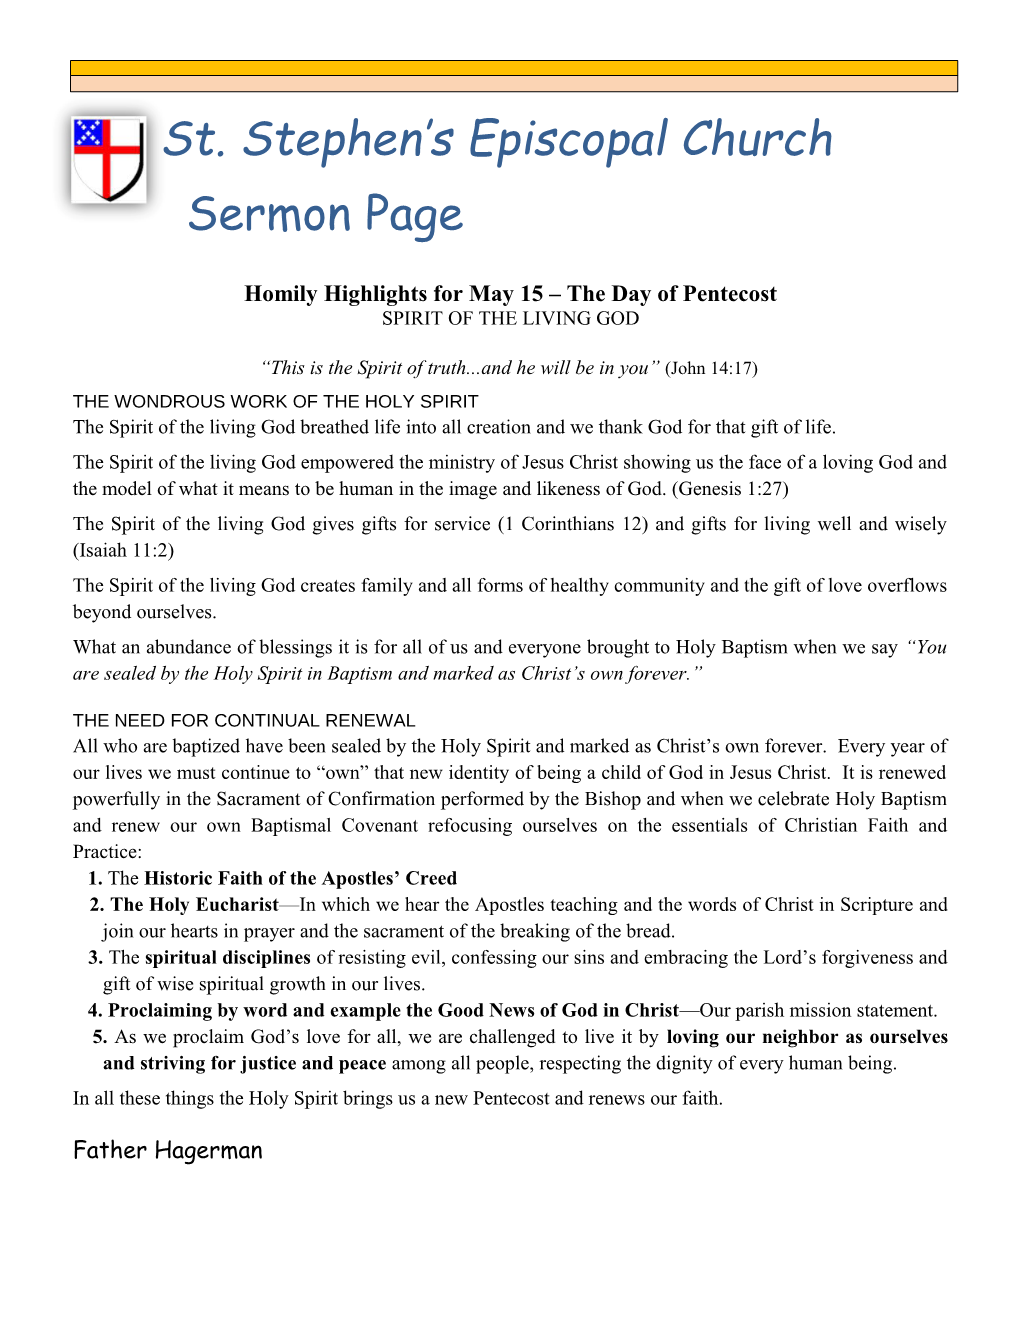 Homily Highlights for May 15 the Day of Pentecost